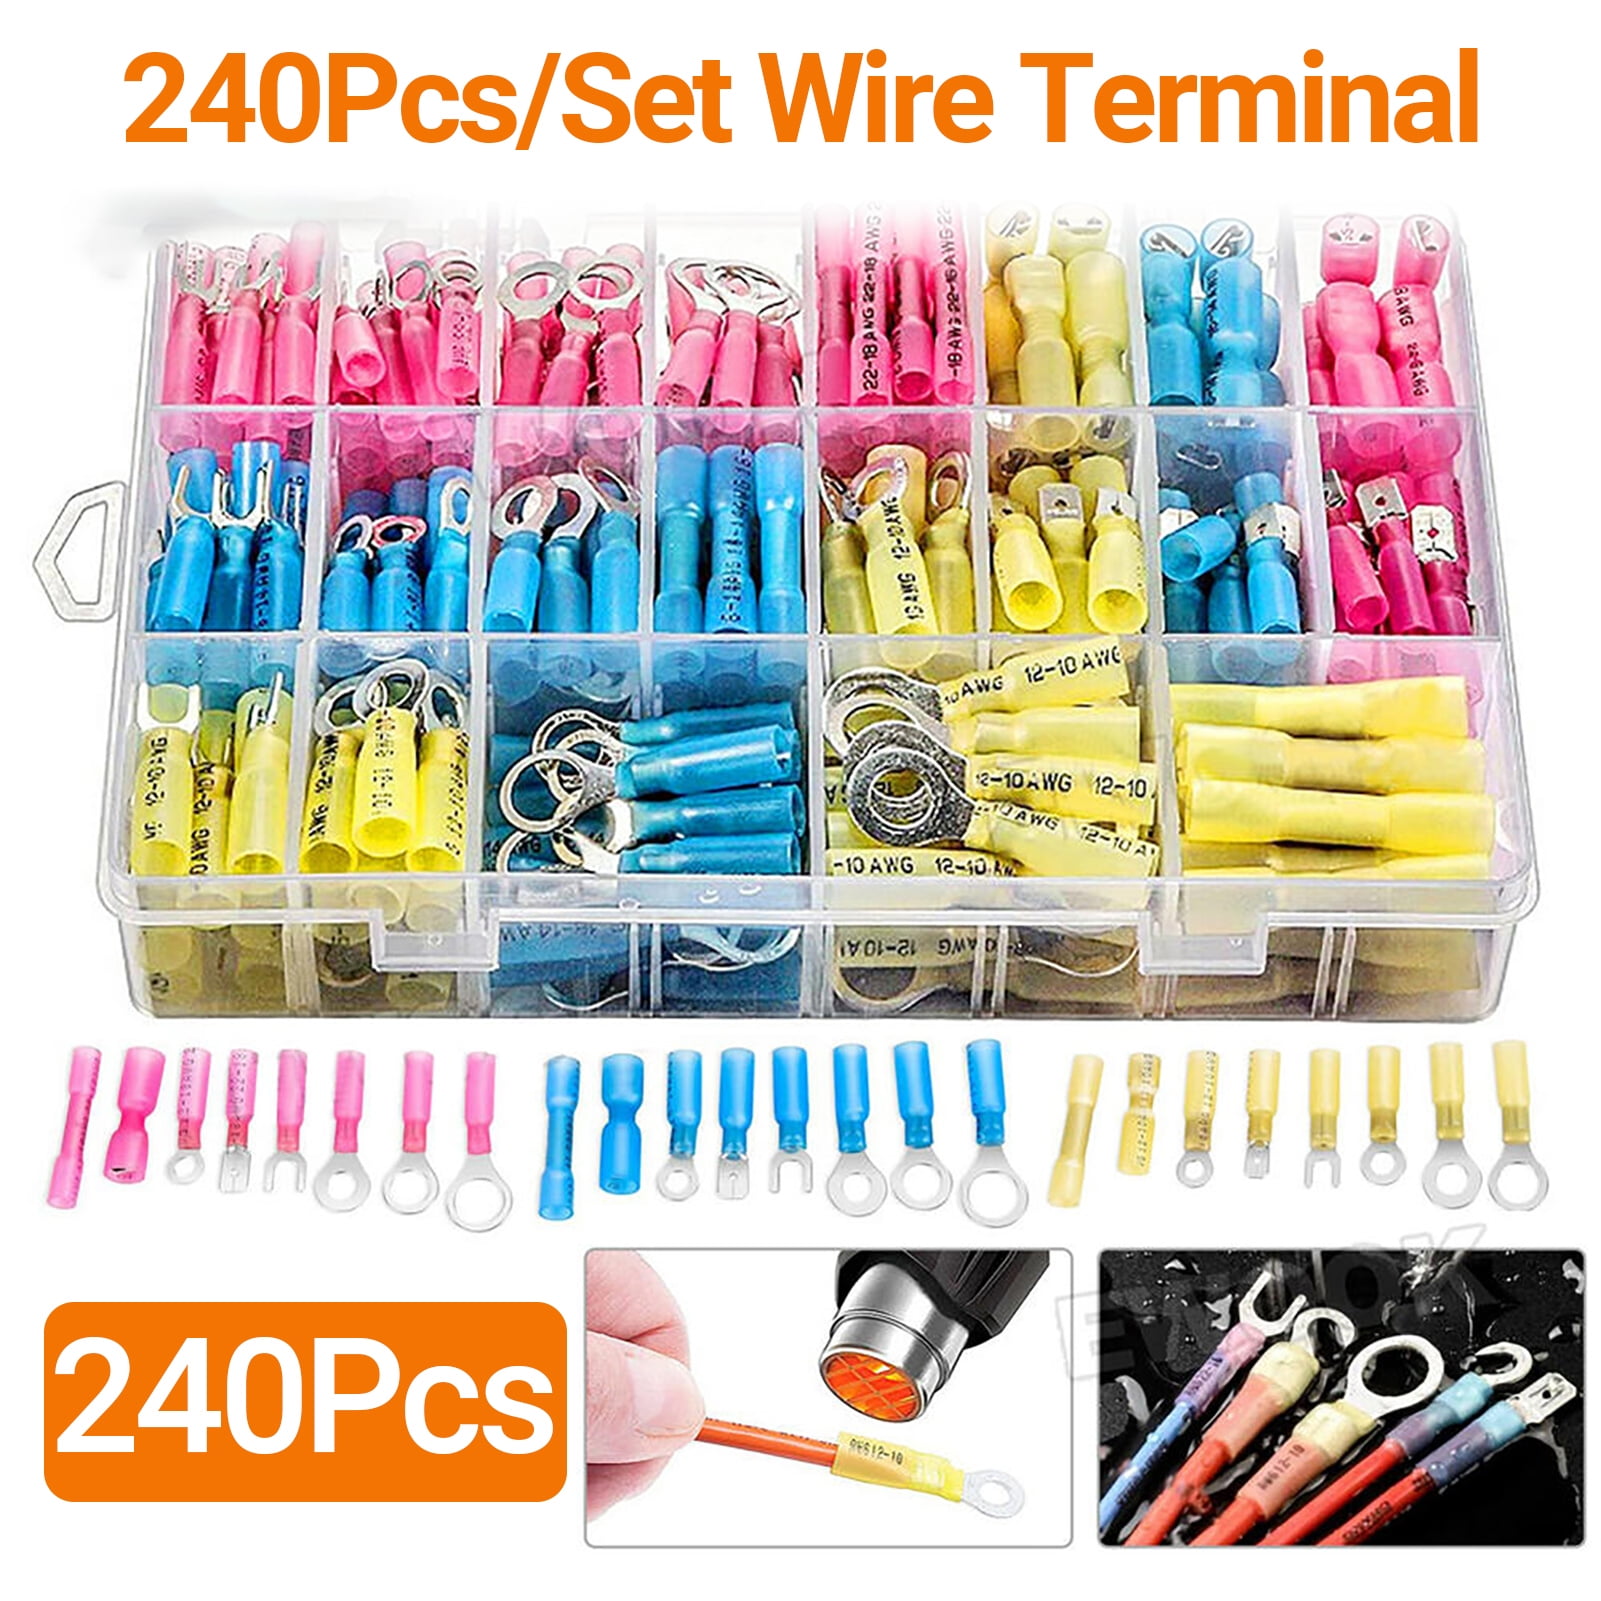 220Pcs Heat Shrink Male/Female Bullet Sleeve Connector Splice Terminal Insulated 